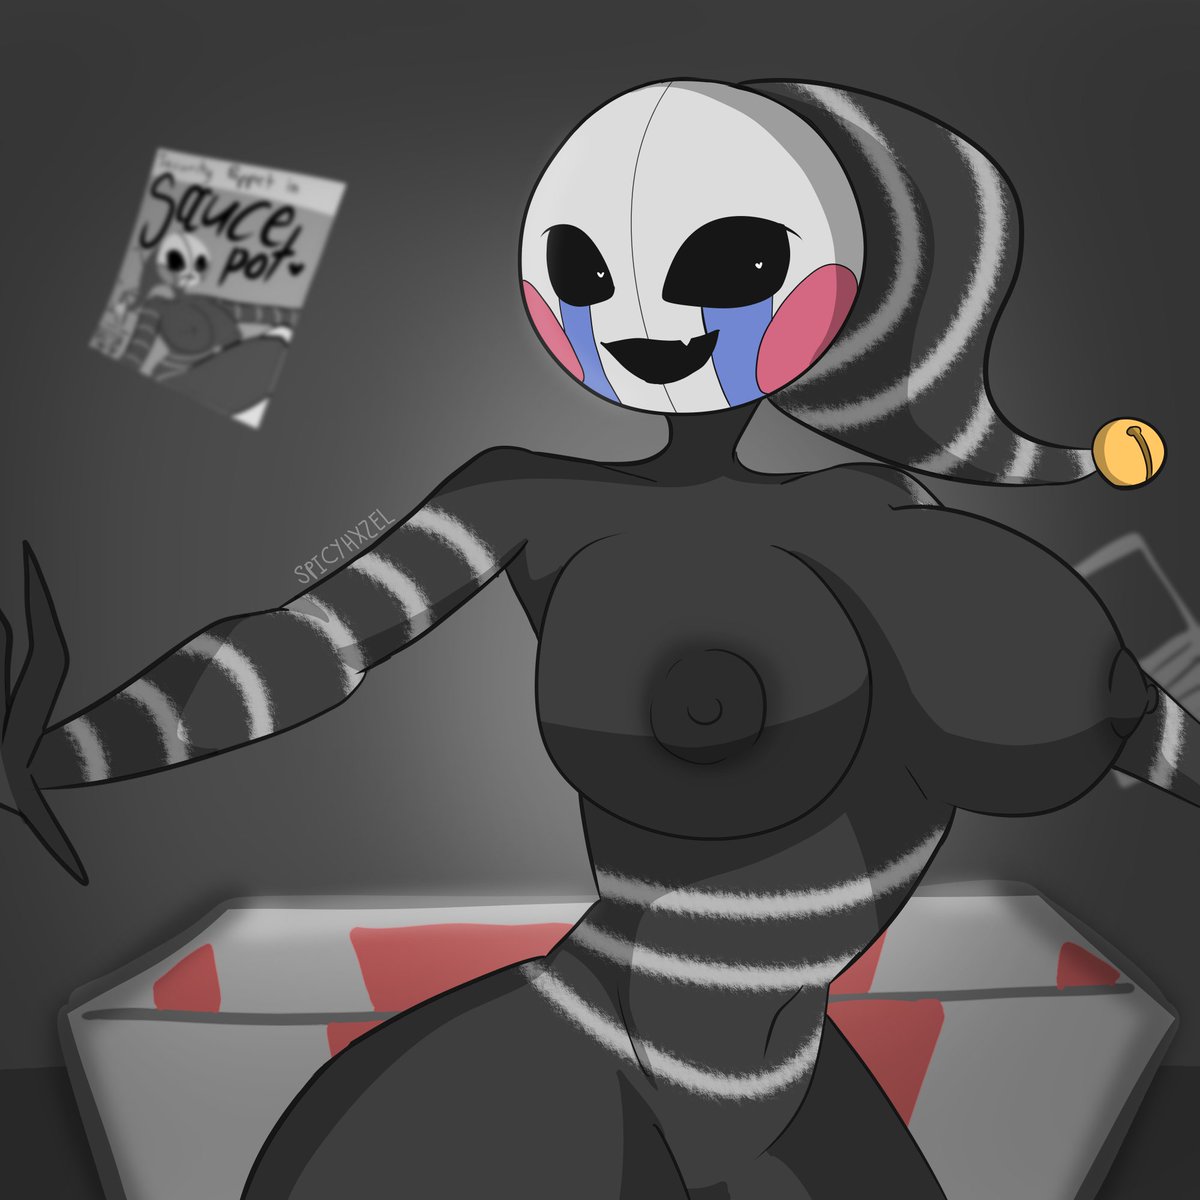 Security puppet porn